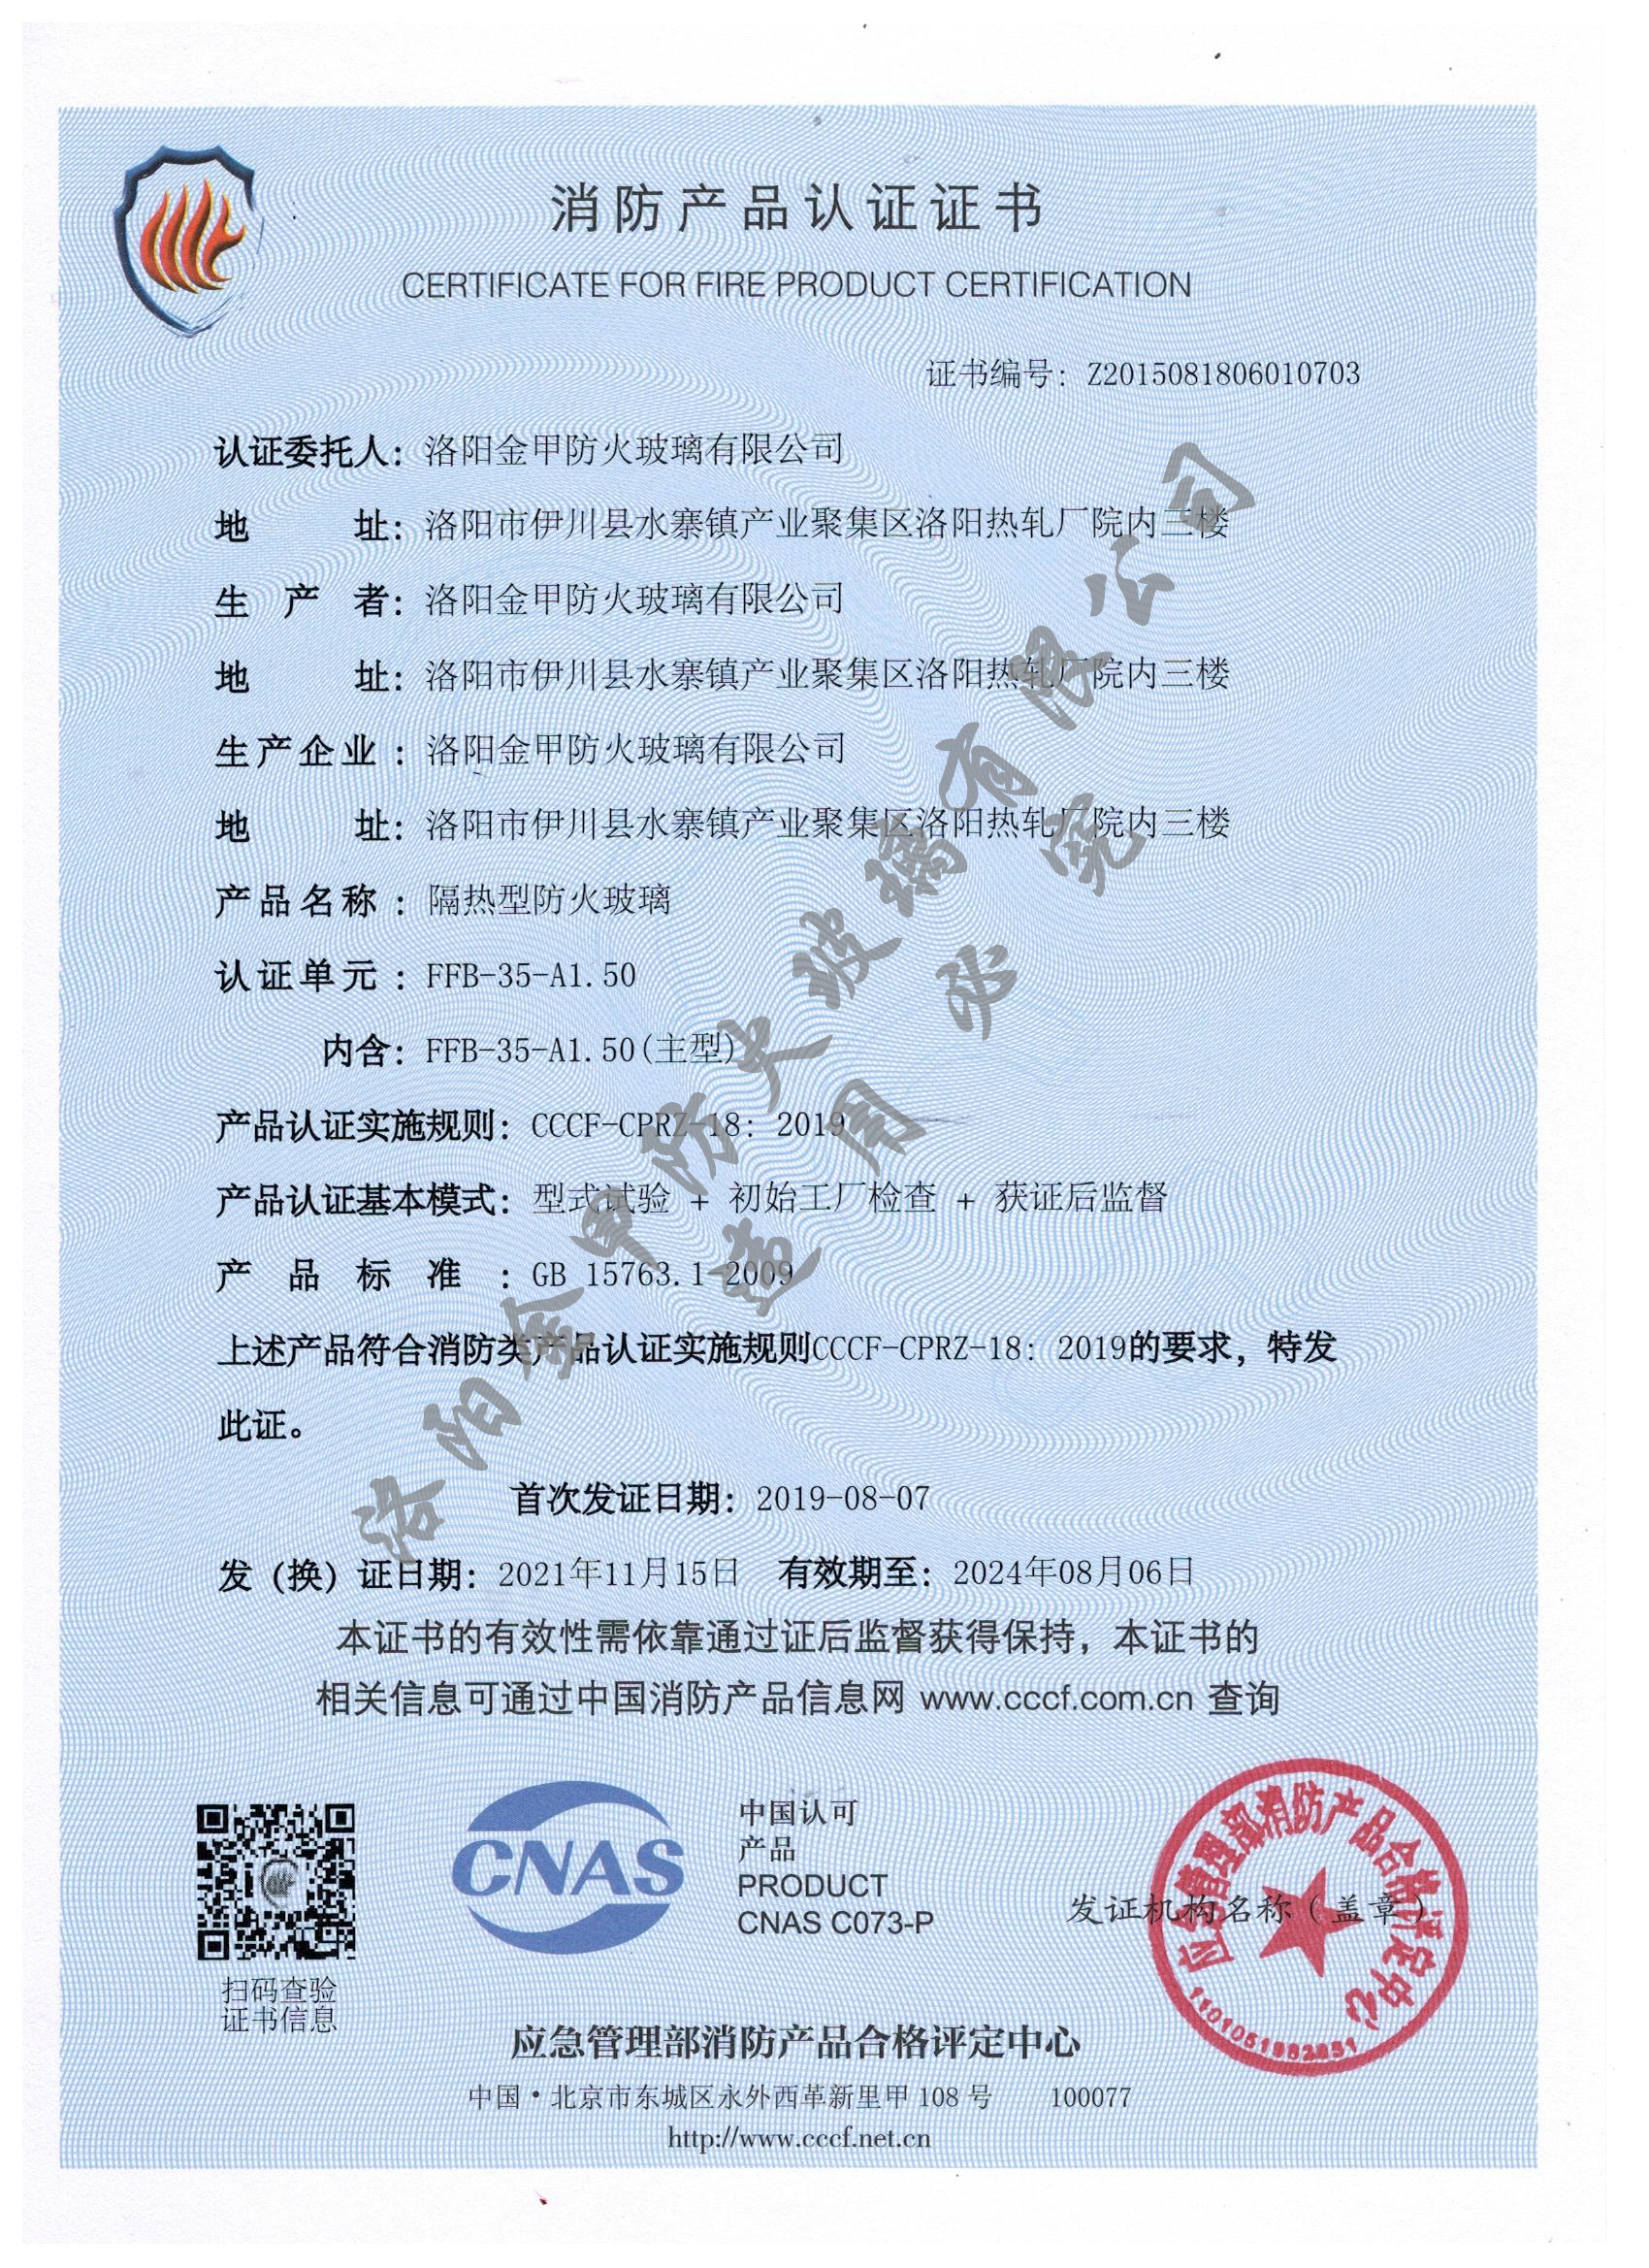 Voluntary certification of 35mm insulated fireproof glass